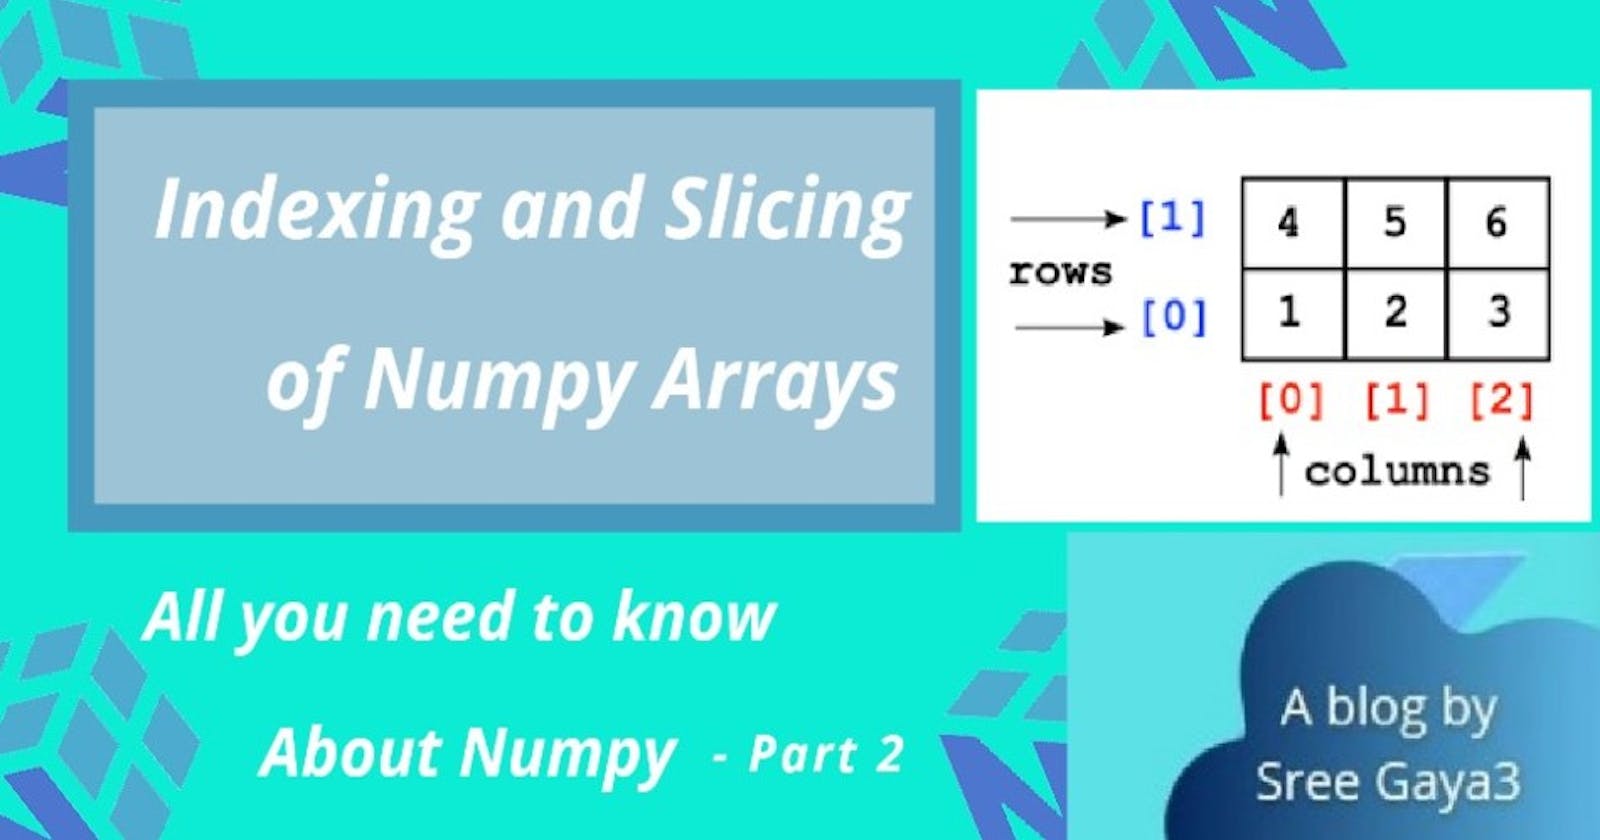 Indexing and Slicing Numpy Arrays